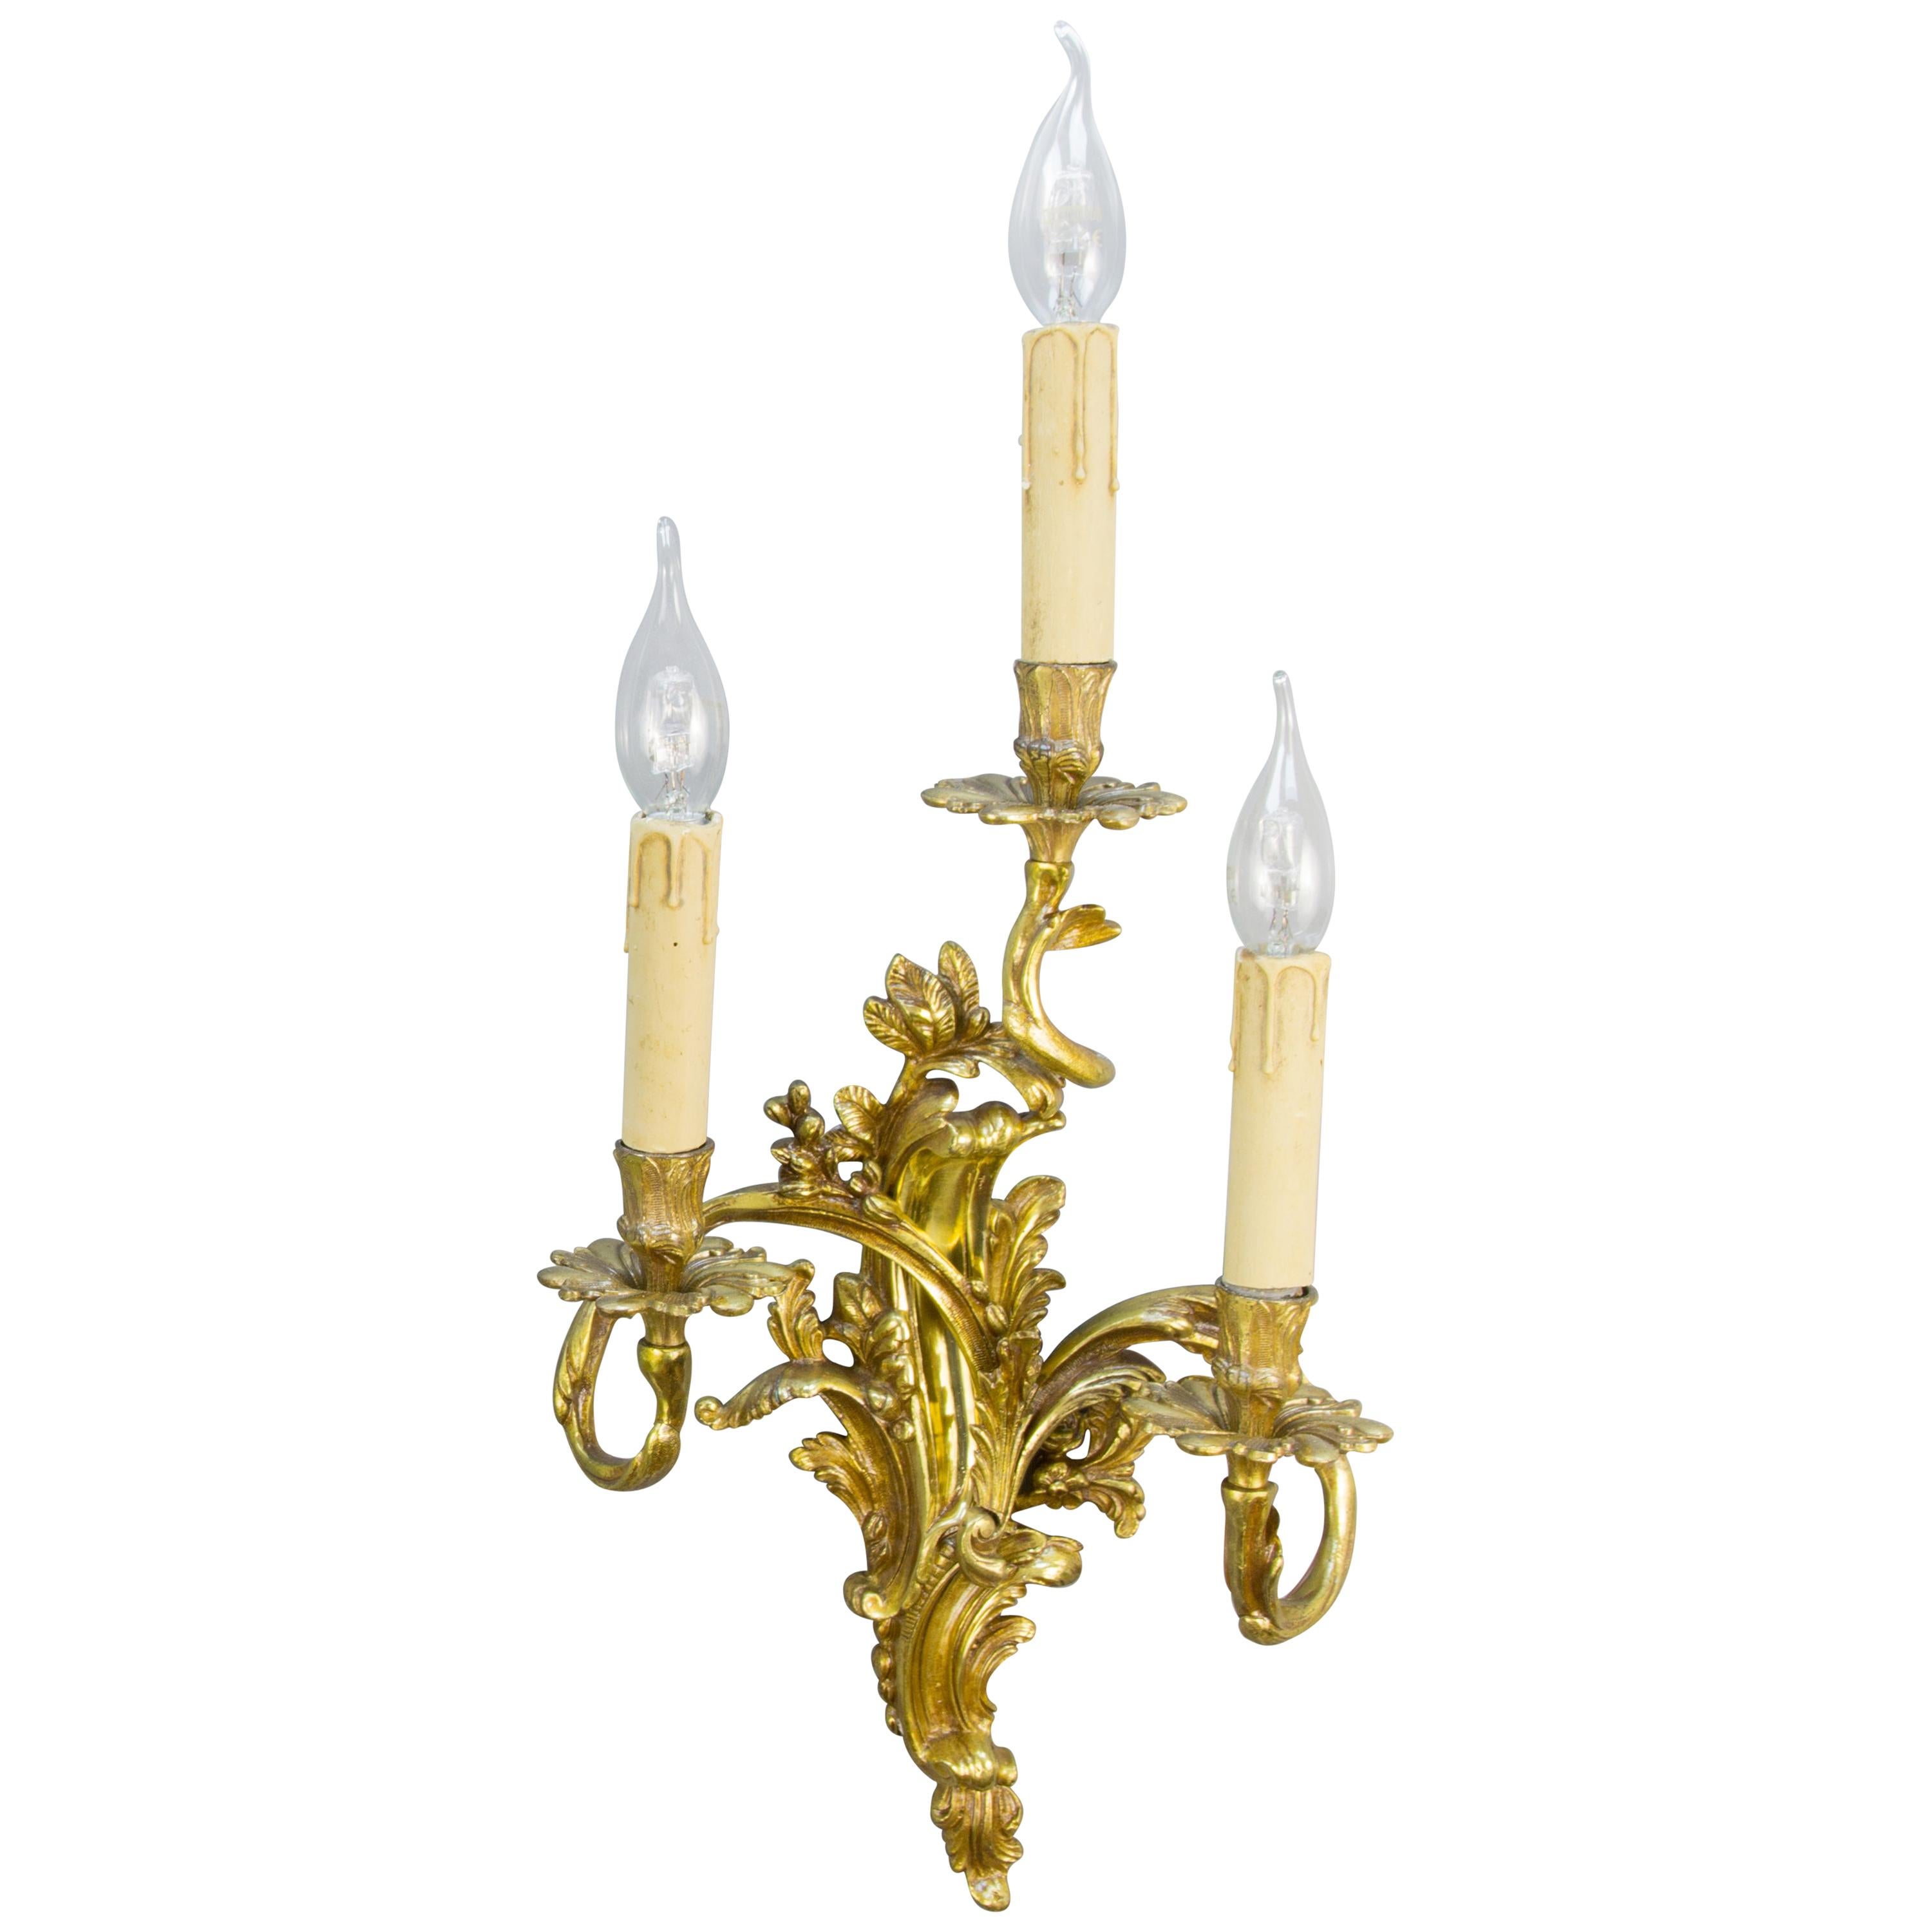 French Louis XV or Rococo Style Gilt Bronze Three-Light Sconce